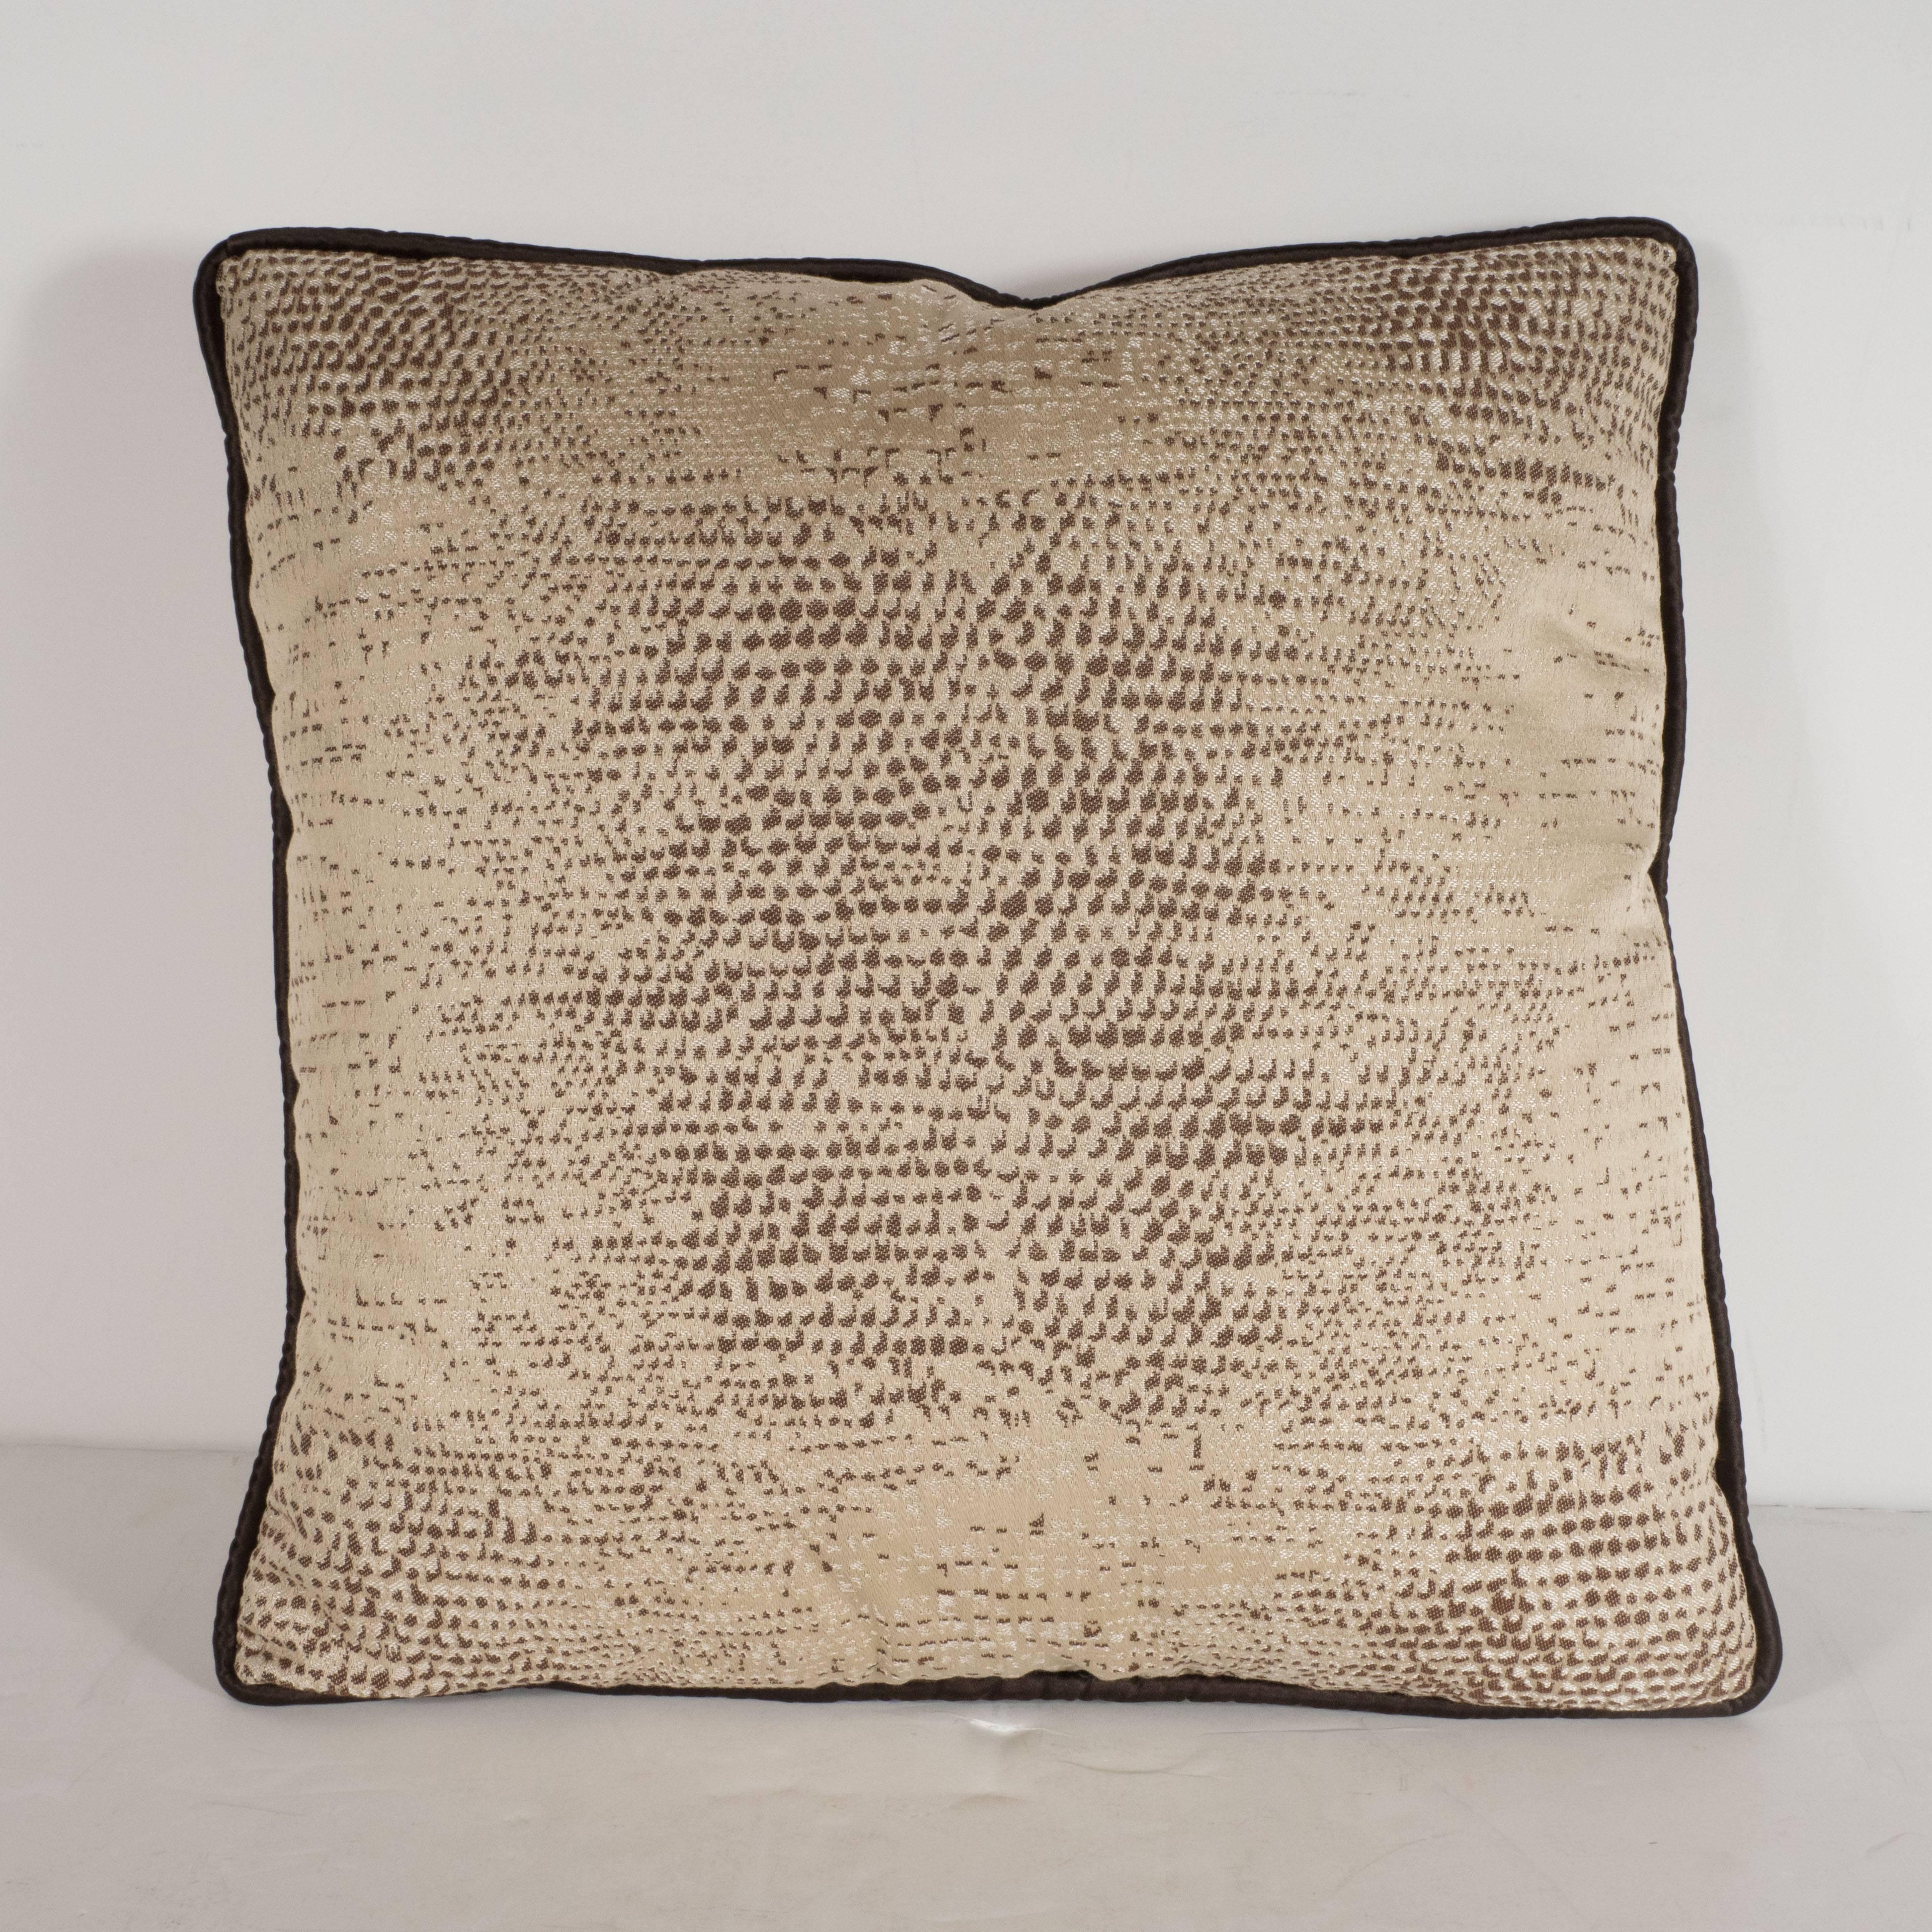 This sophisticated pair of modernist pillows feature an enlarged and stylized lizard print pattern in hues of dark chocolate, coffee and tan set against an ecru background. With their neutral pattern and dynamic pattern, these pillows would be a